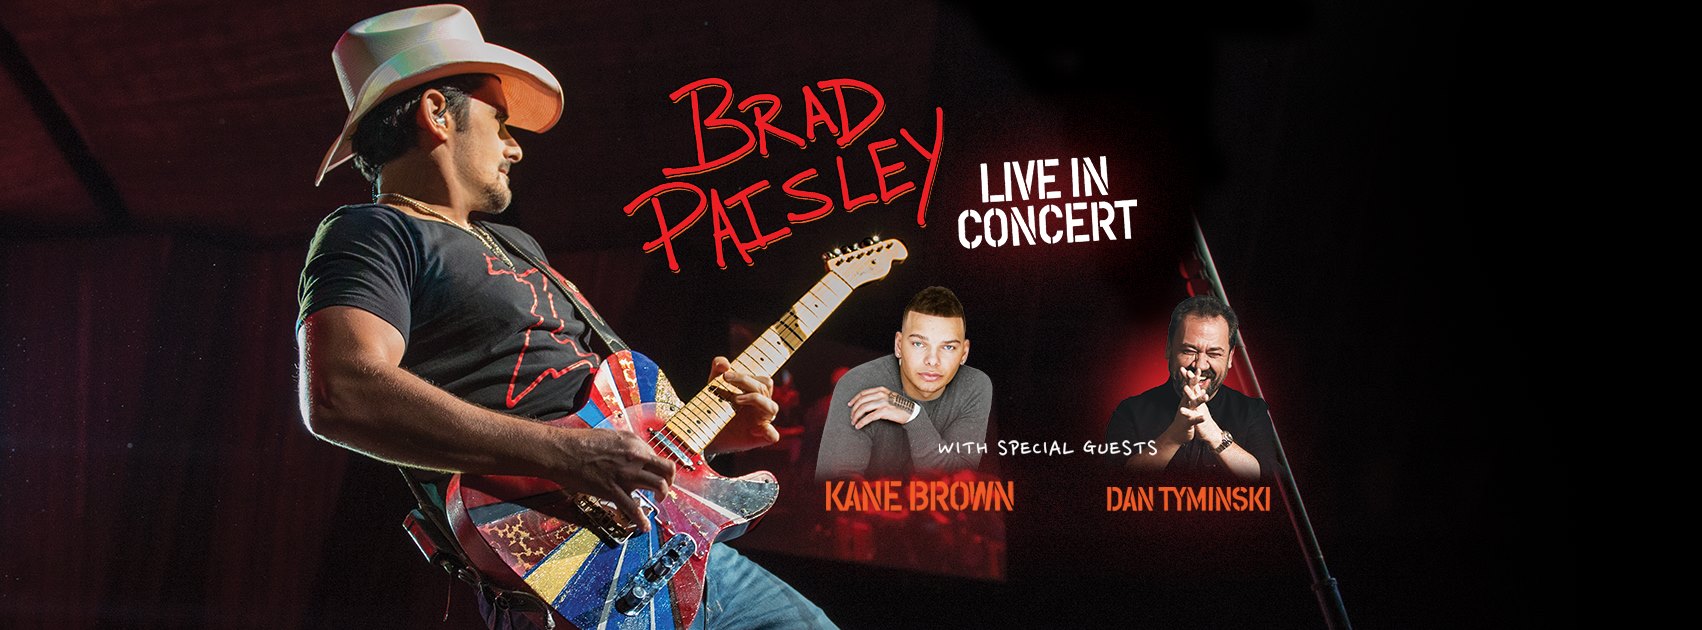 Brad Paisely At Jiffy Lube Live 8-25-2018